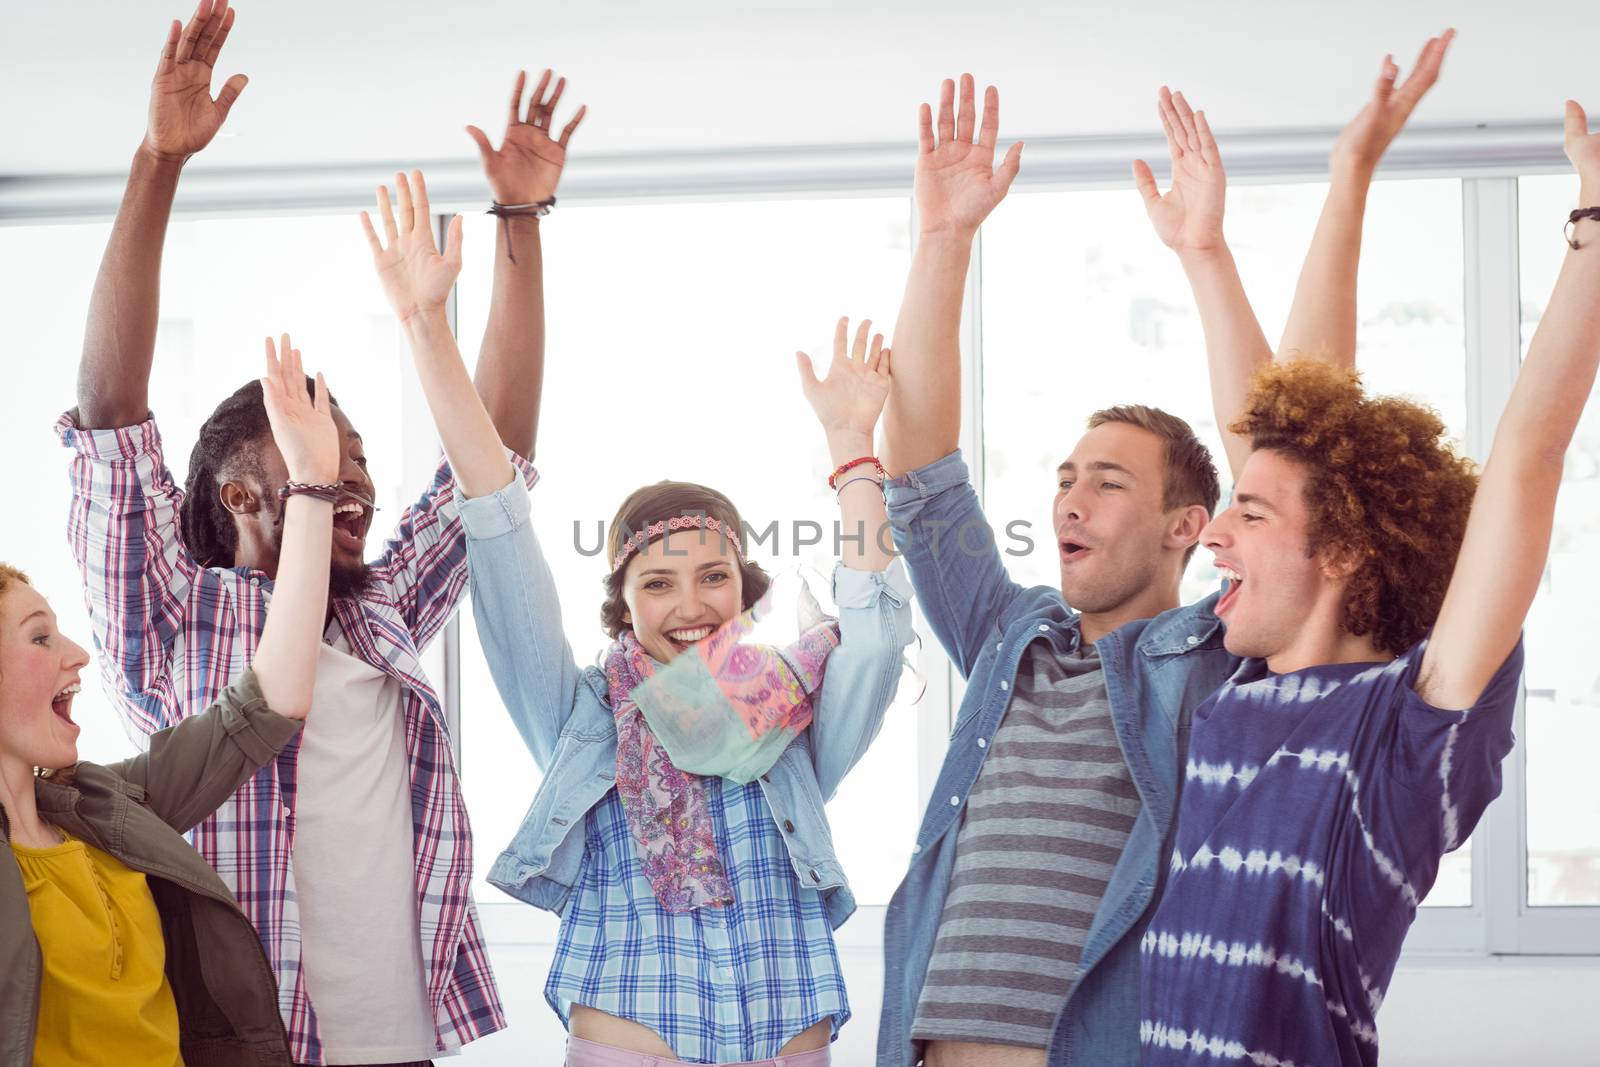 Fashion students cheering together by Wavebreakmedia